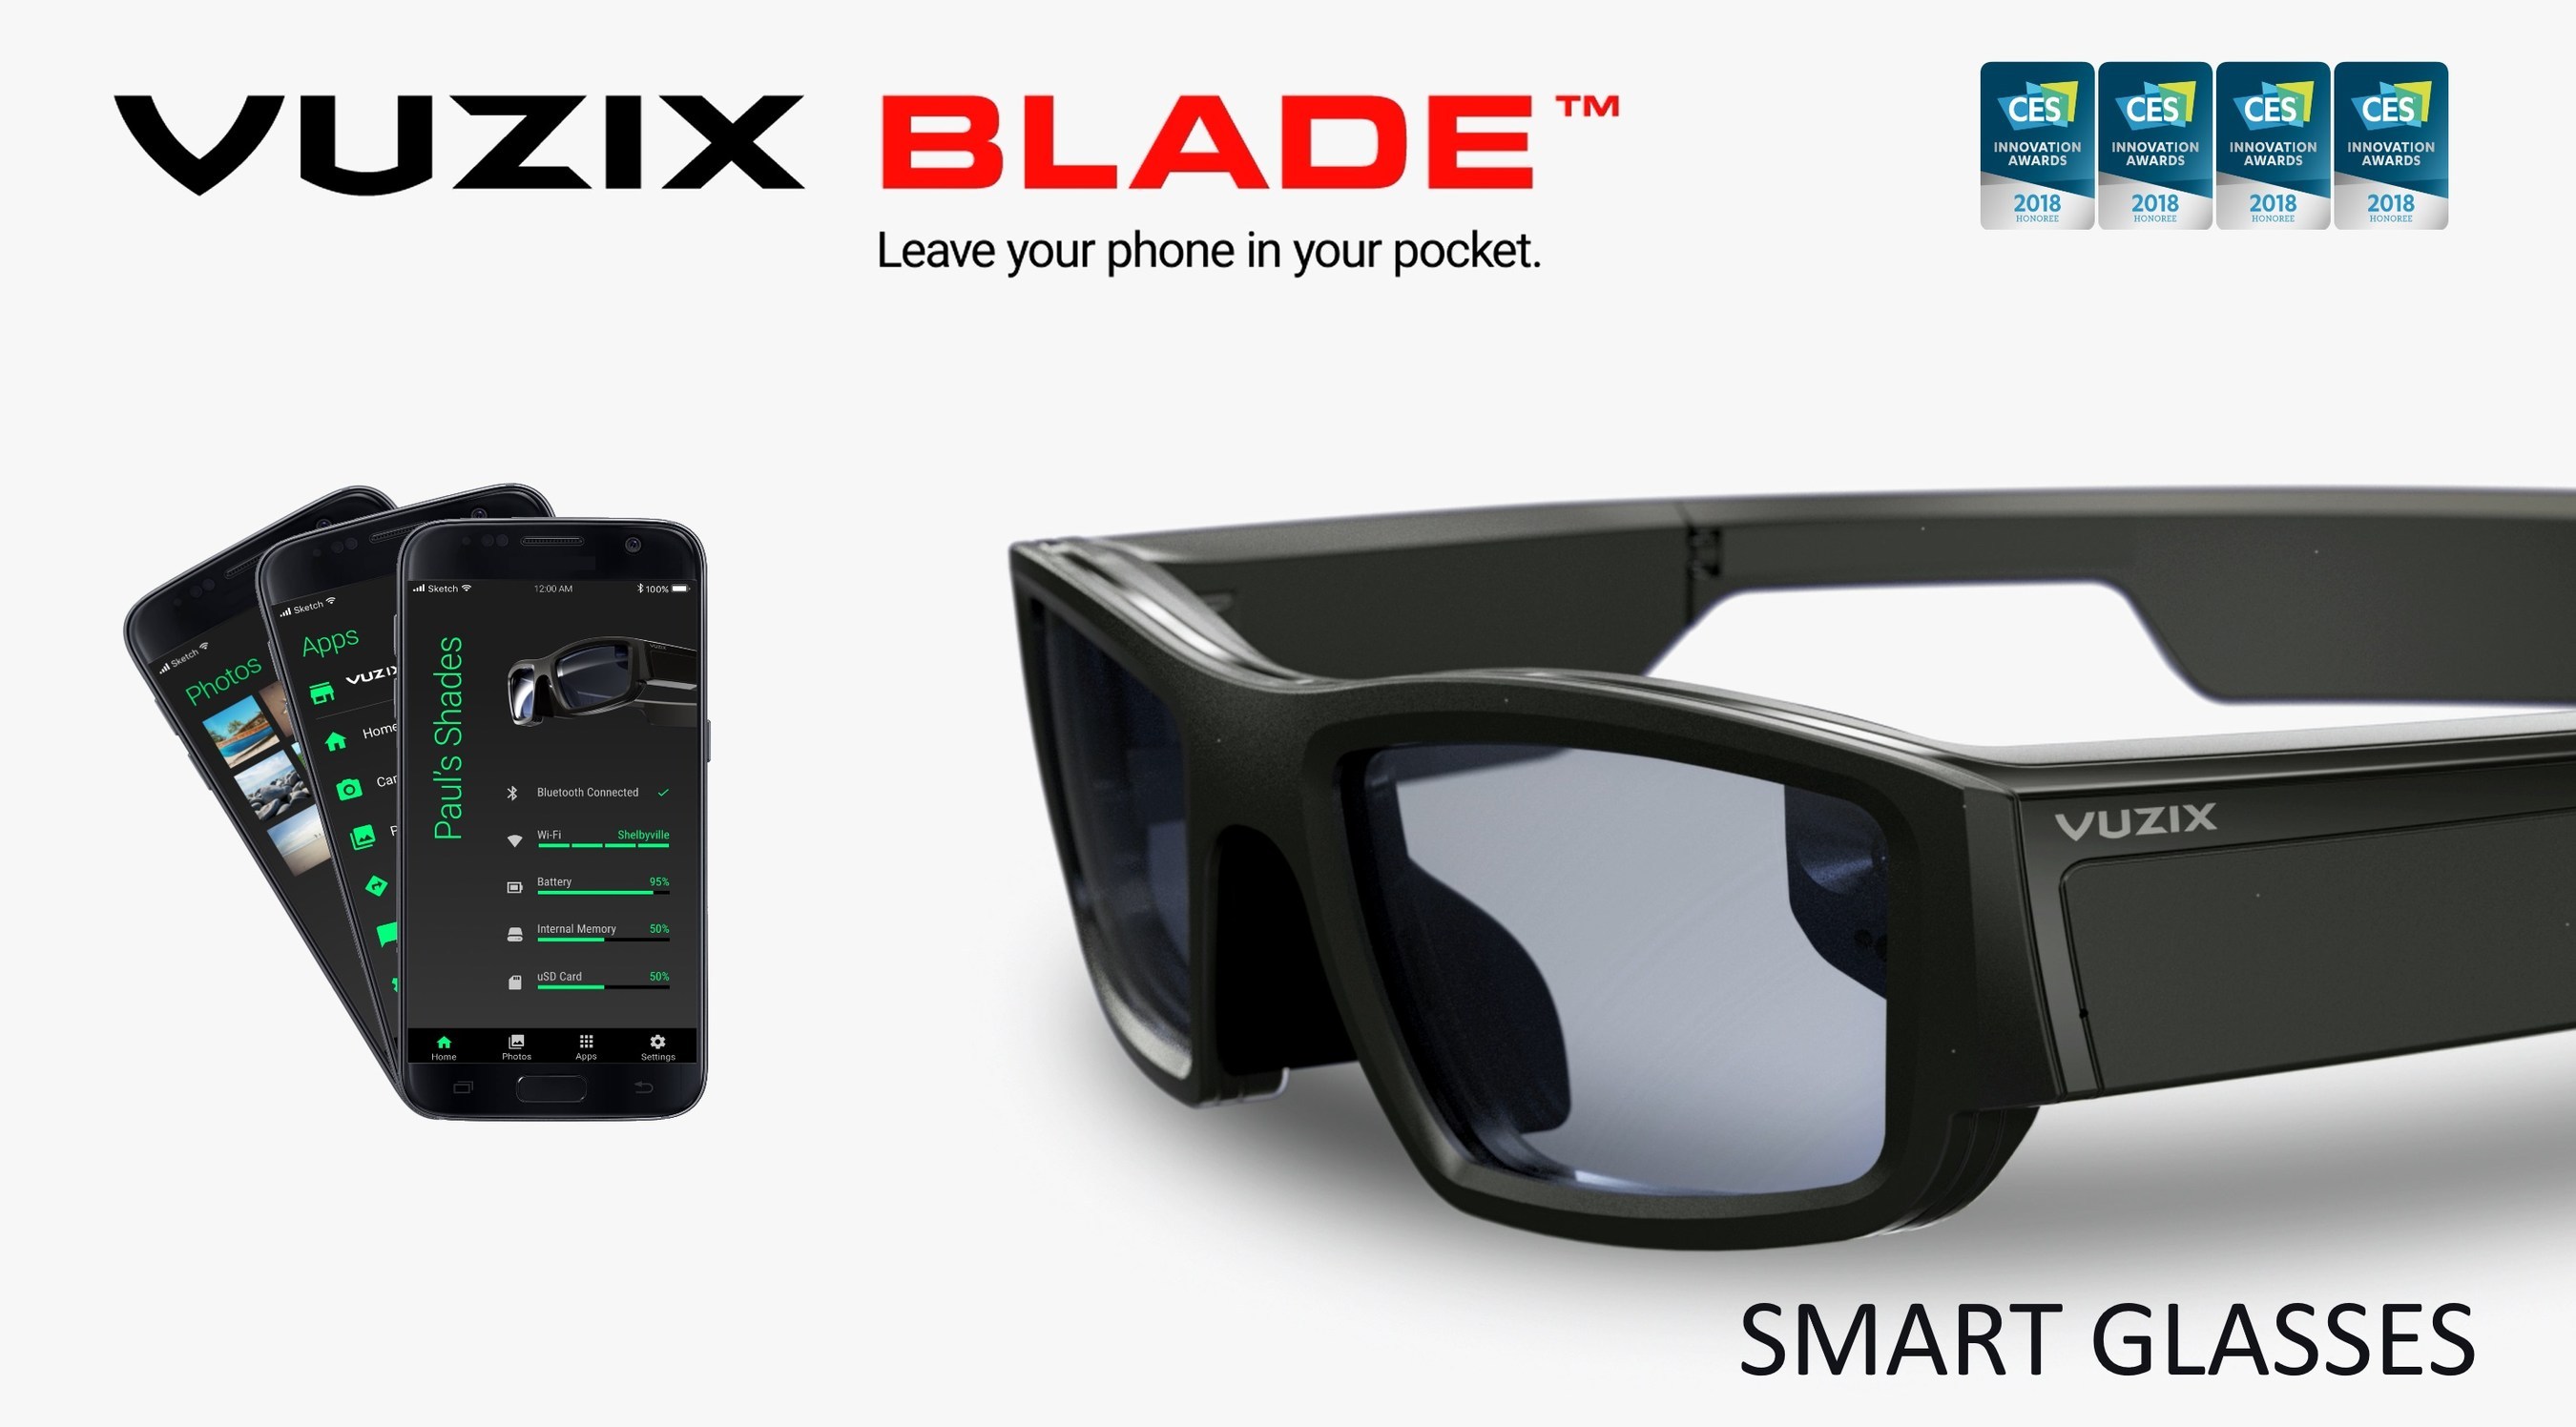 Vuzix to Display its Award Winning Augmented Reality Technology at CES 2018